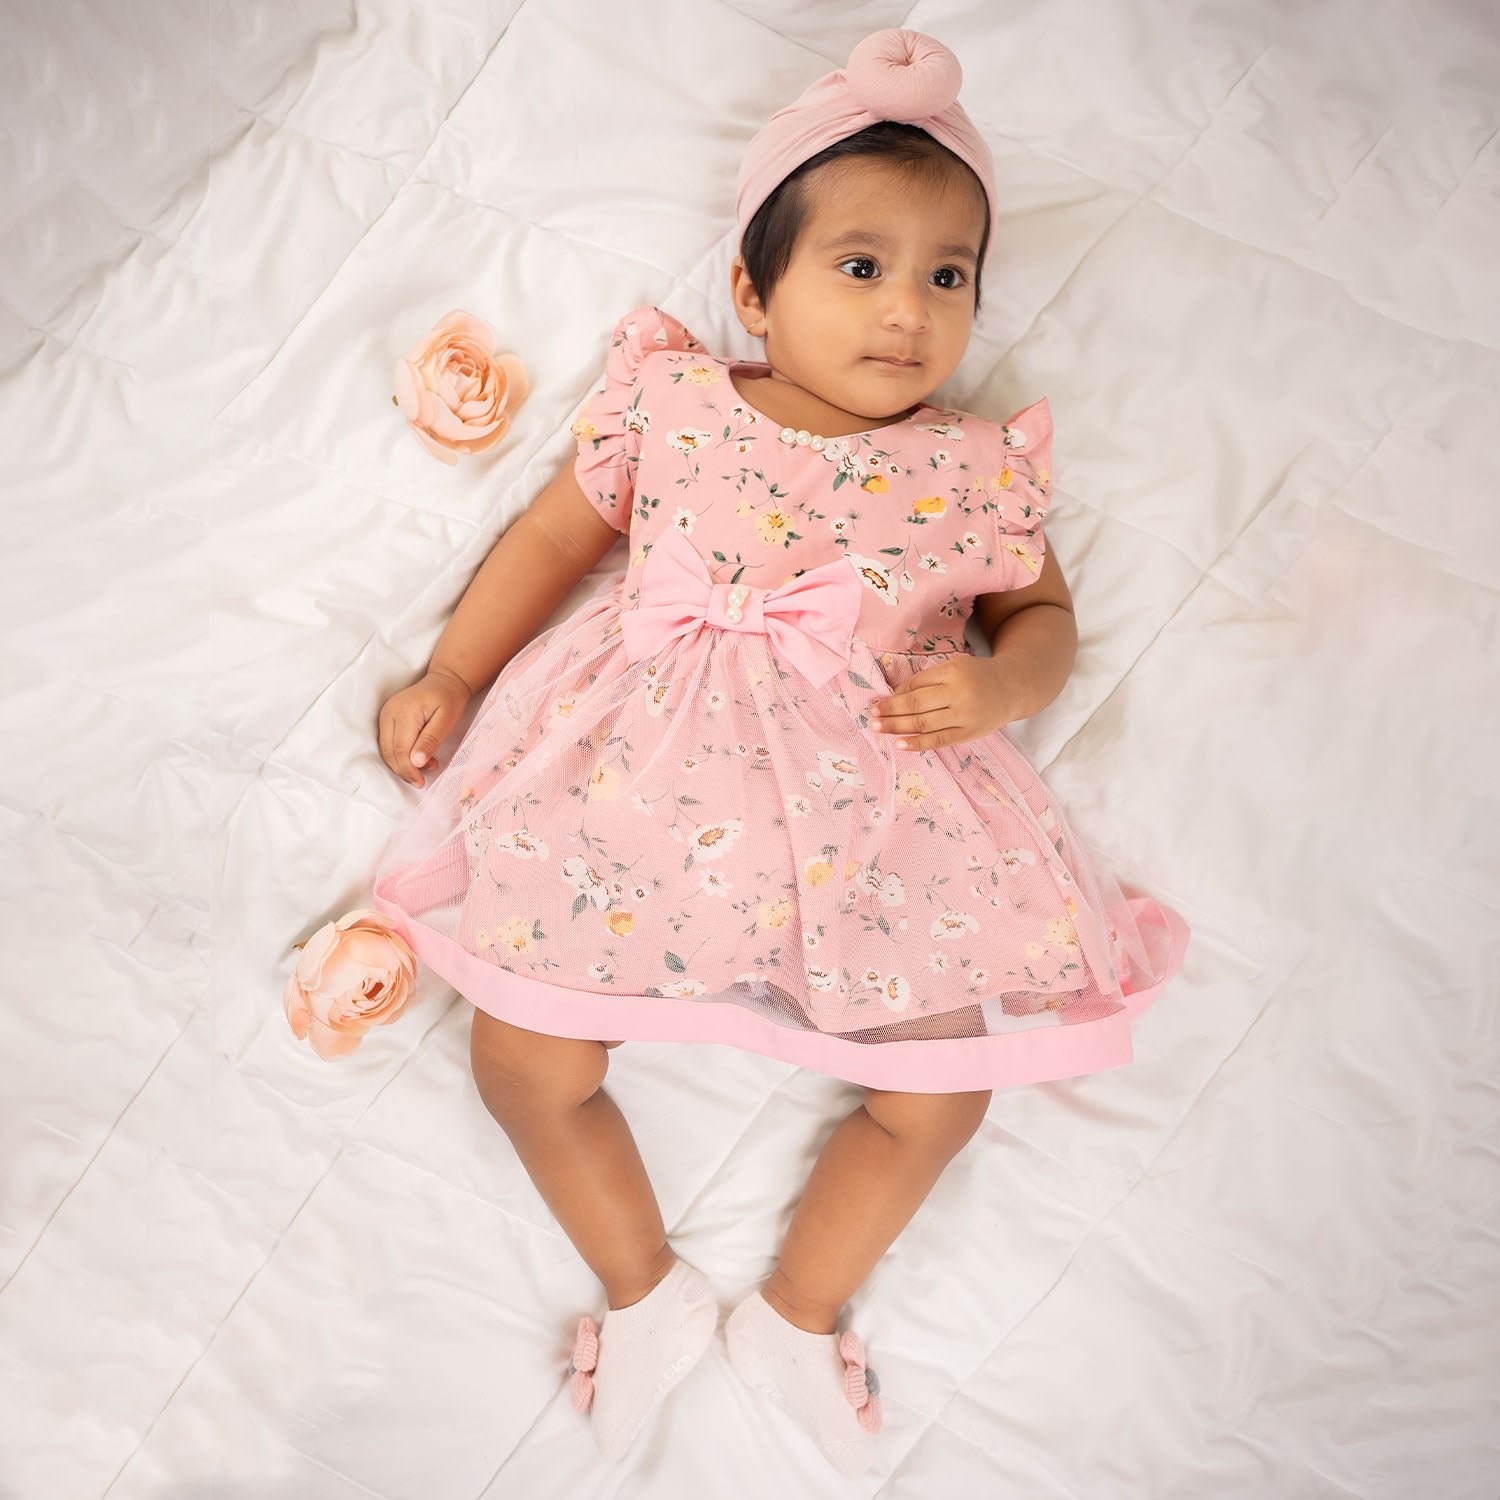 Buy Knot Pink Turban Cap and Socks Set for Kids Online